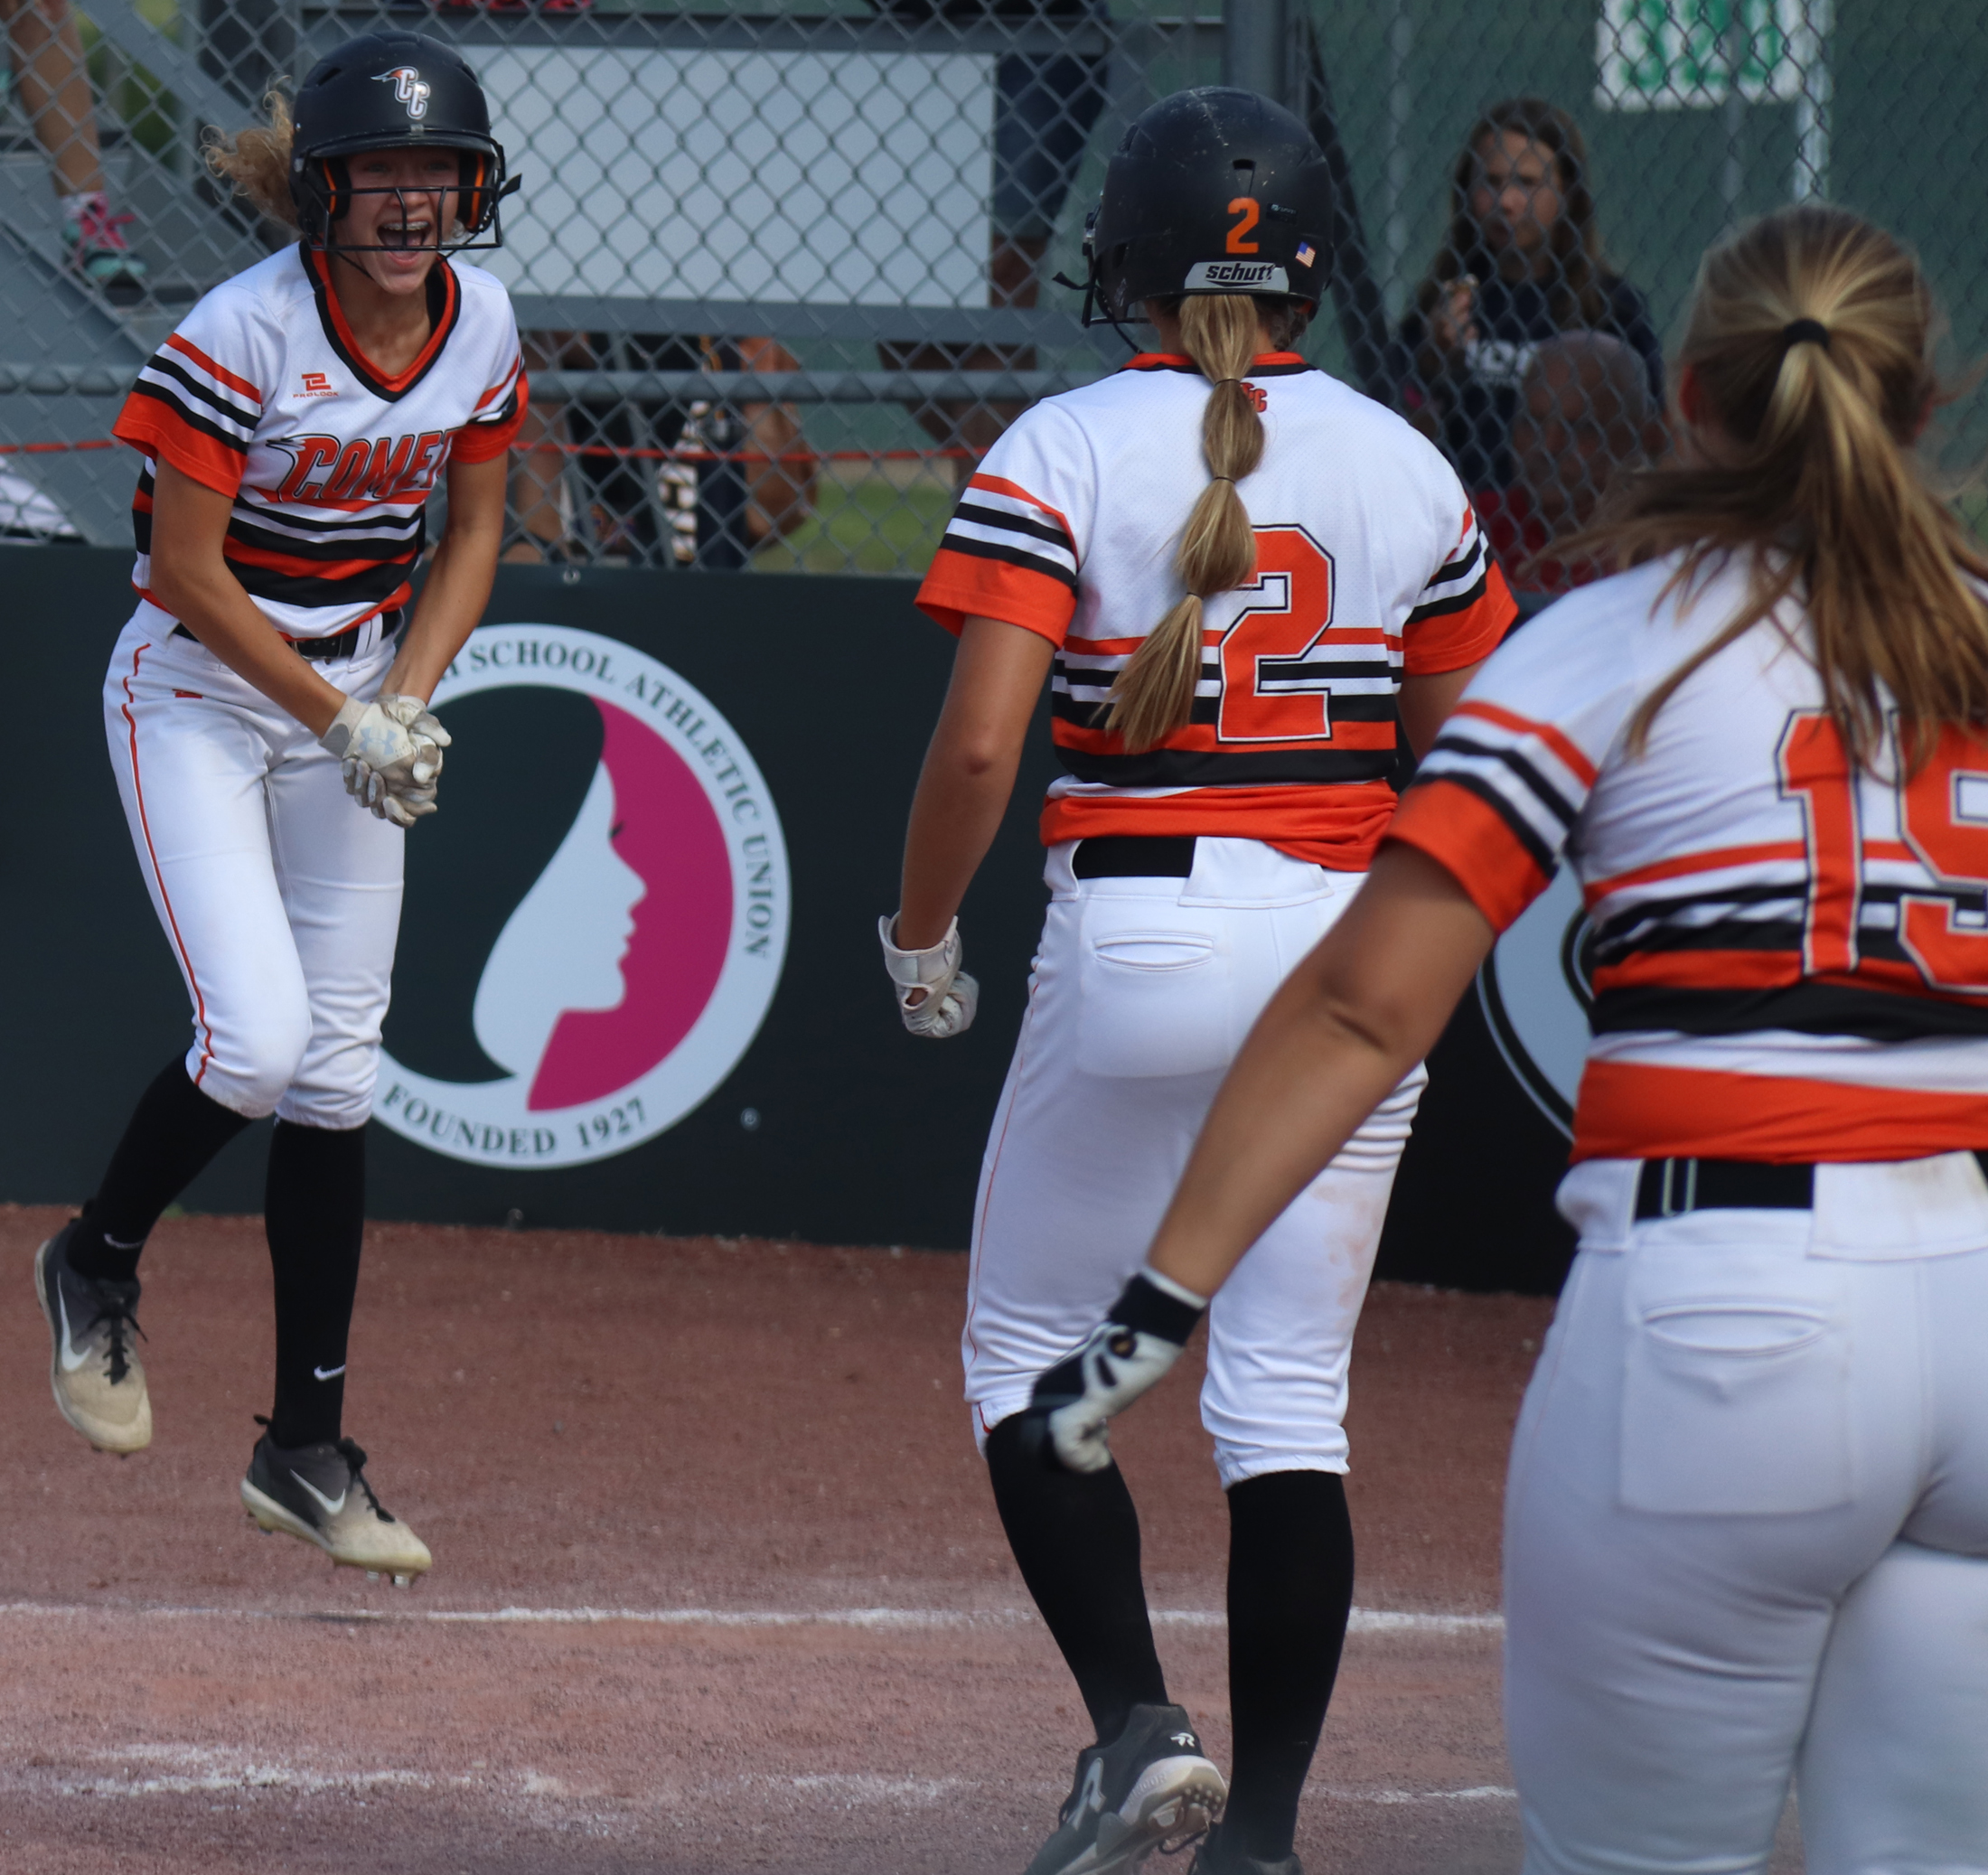 Comets ‘walk’ into state semis with 4-3 win over Fillies